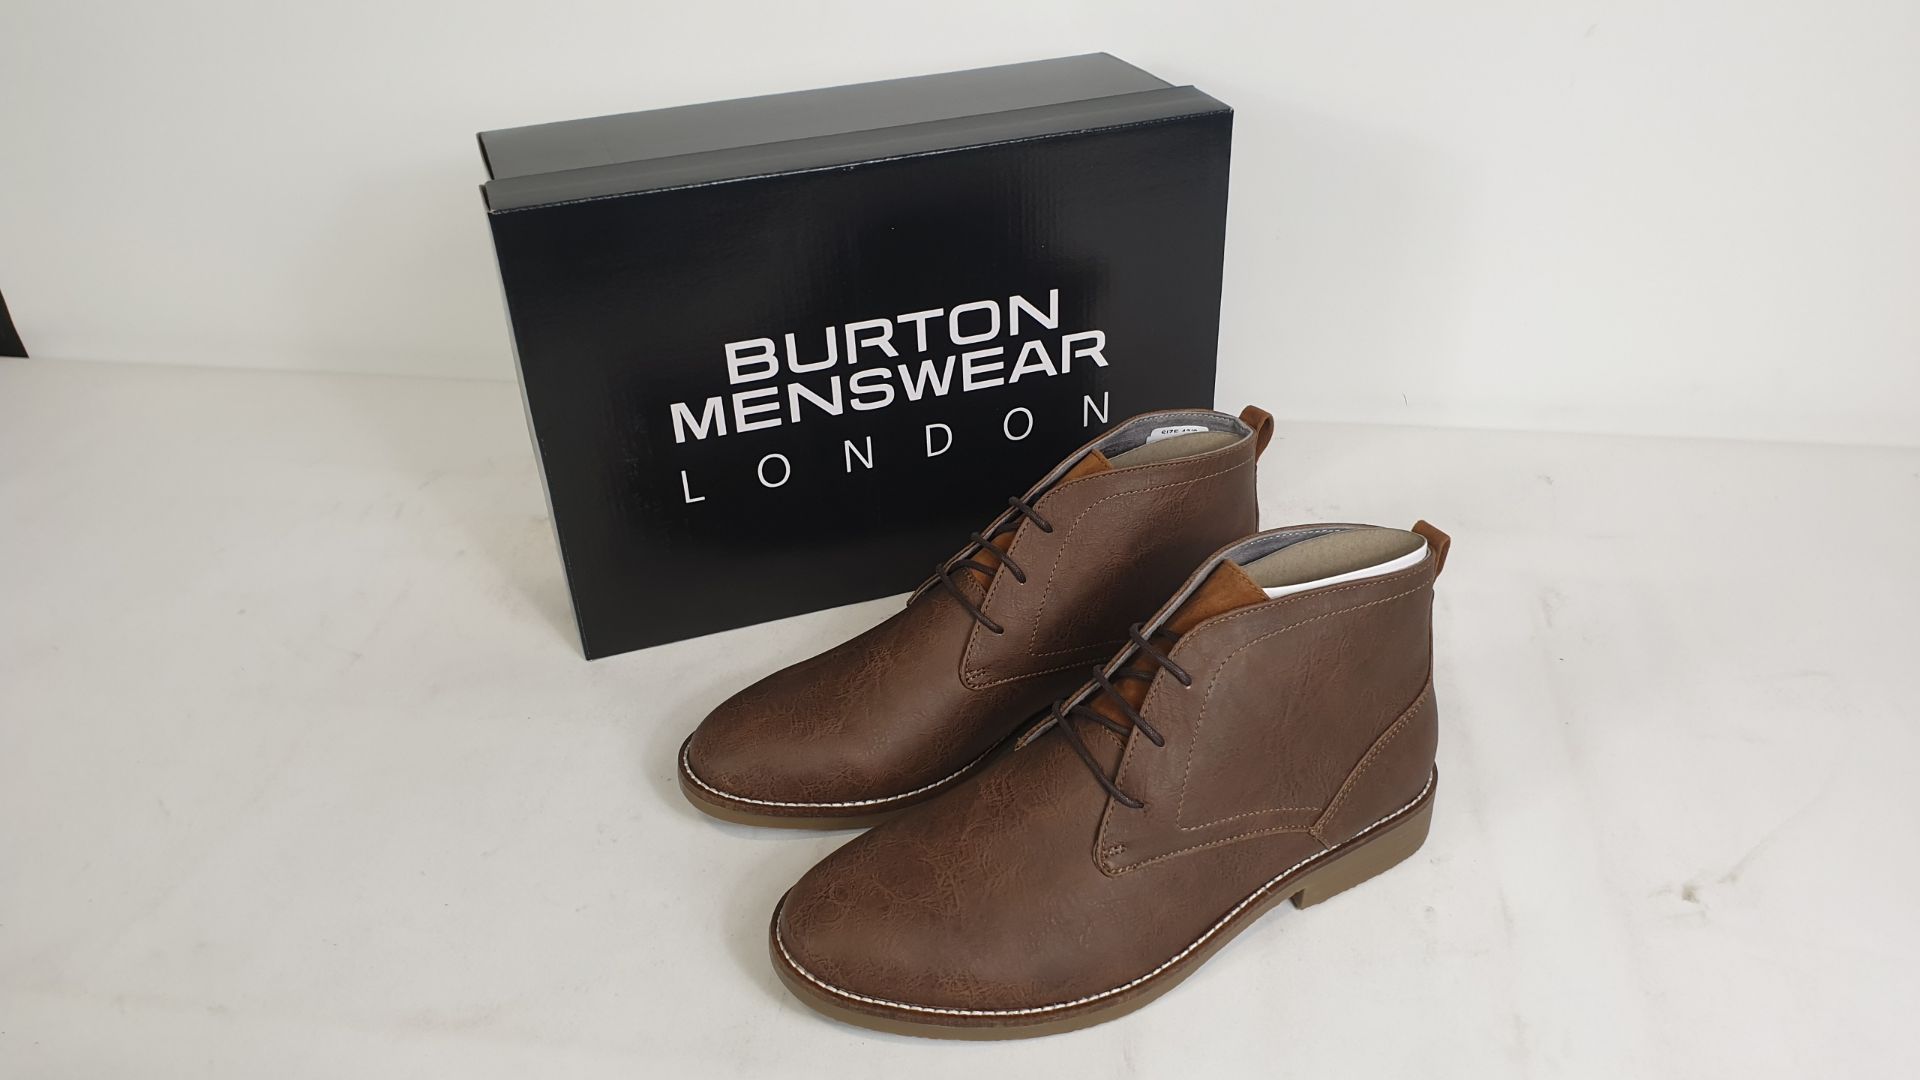 10 X BRAND NEW BOXED PAIRS OF BURTONS MENSWEAR LEATHER LOOK TAN COLOURED CHUKKA BOOTS SIZE 8